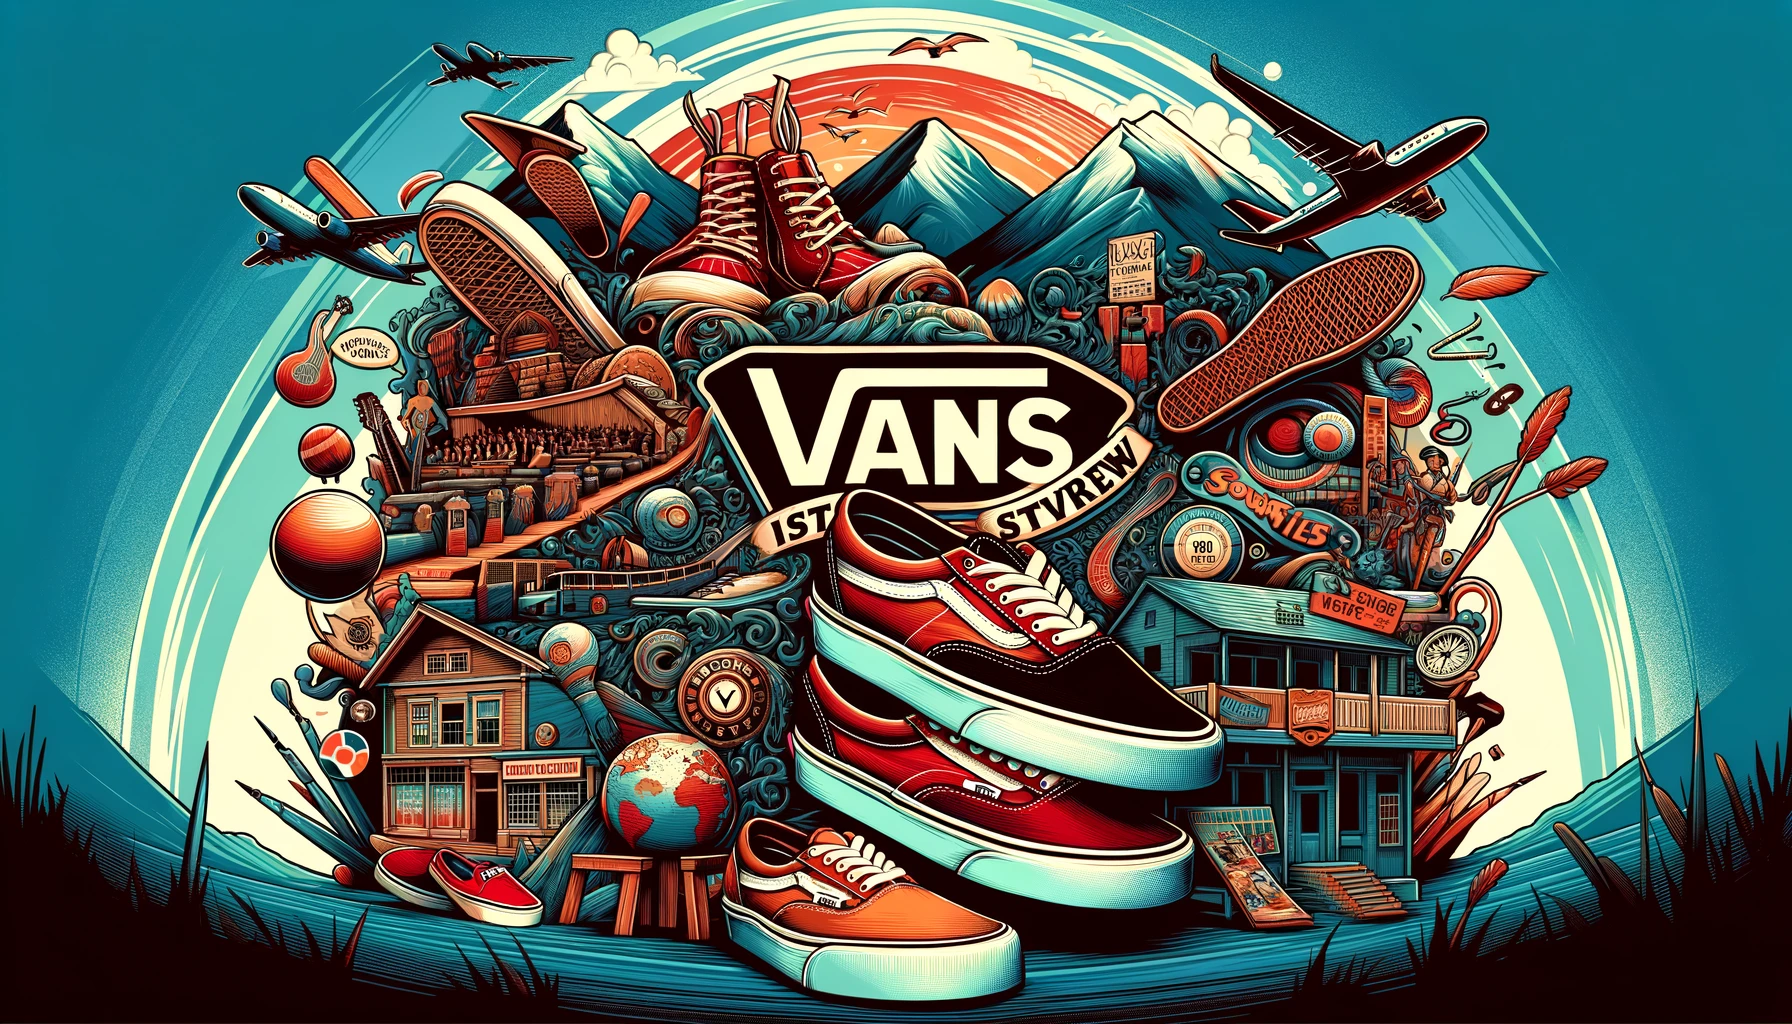 An image depicting the history and overview of VANS shoes, with a stylish background, featuring the text 'VANS' prominently.